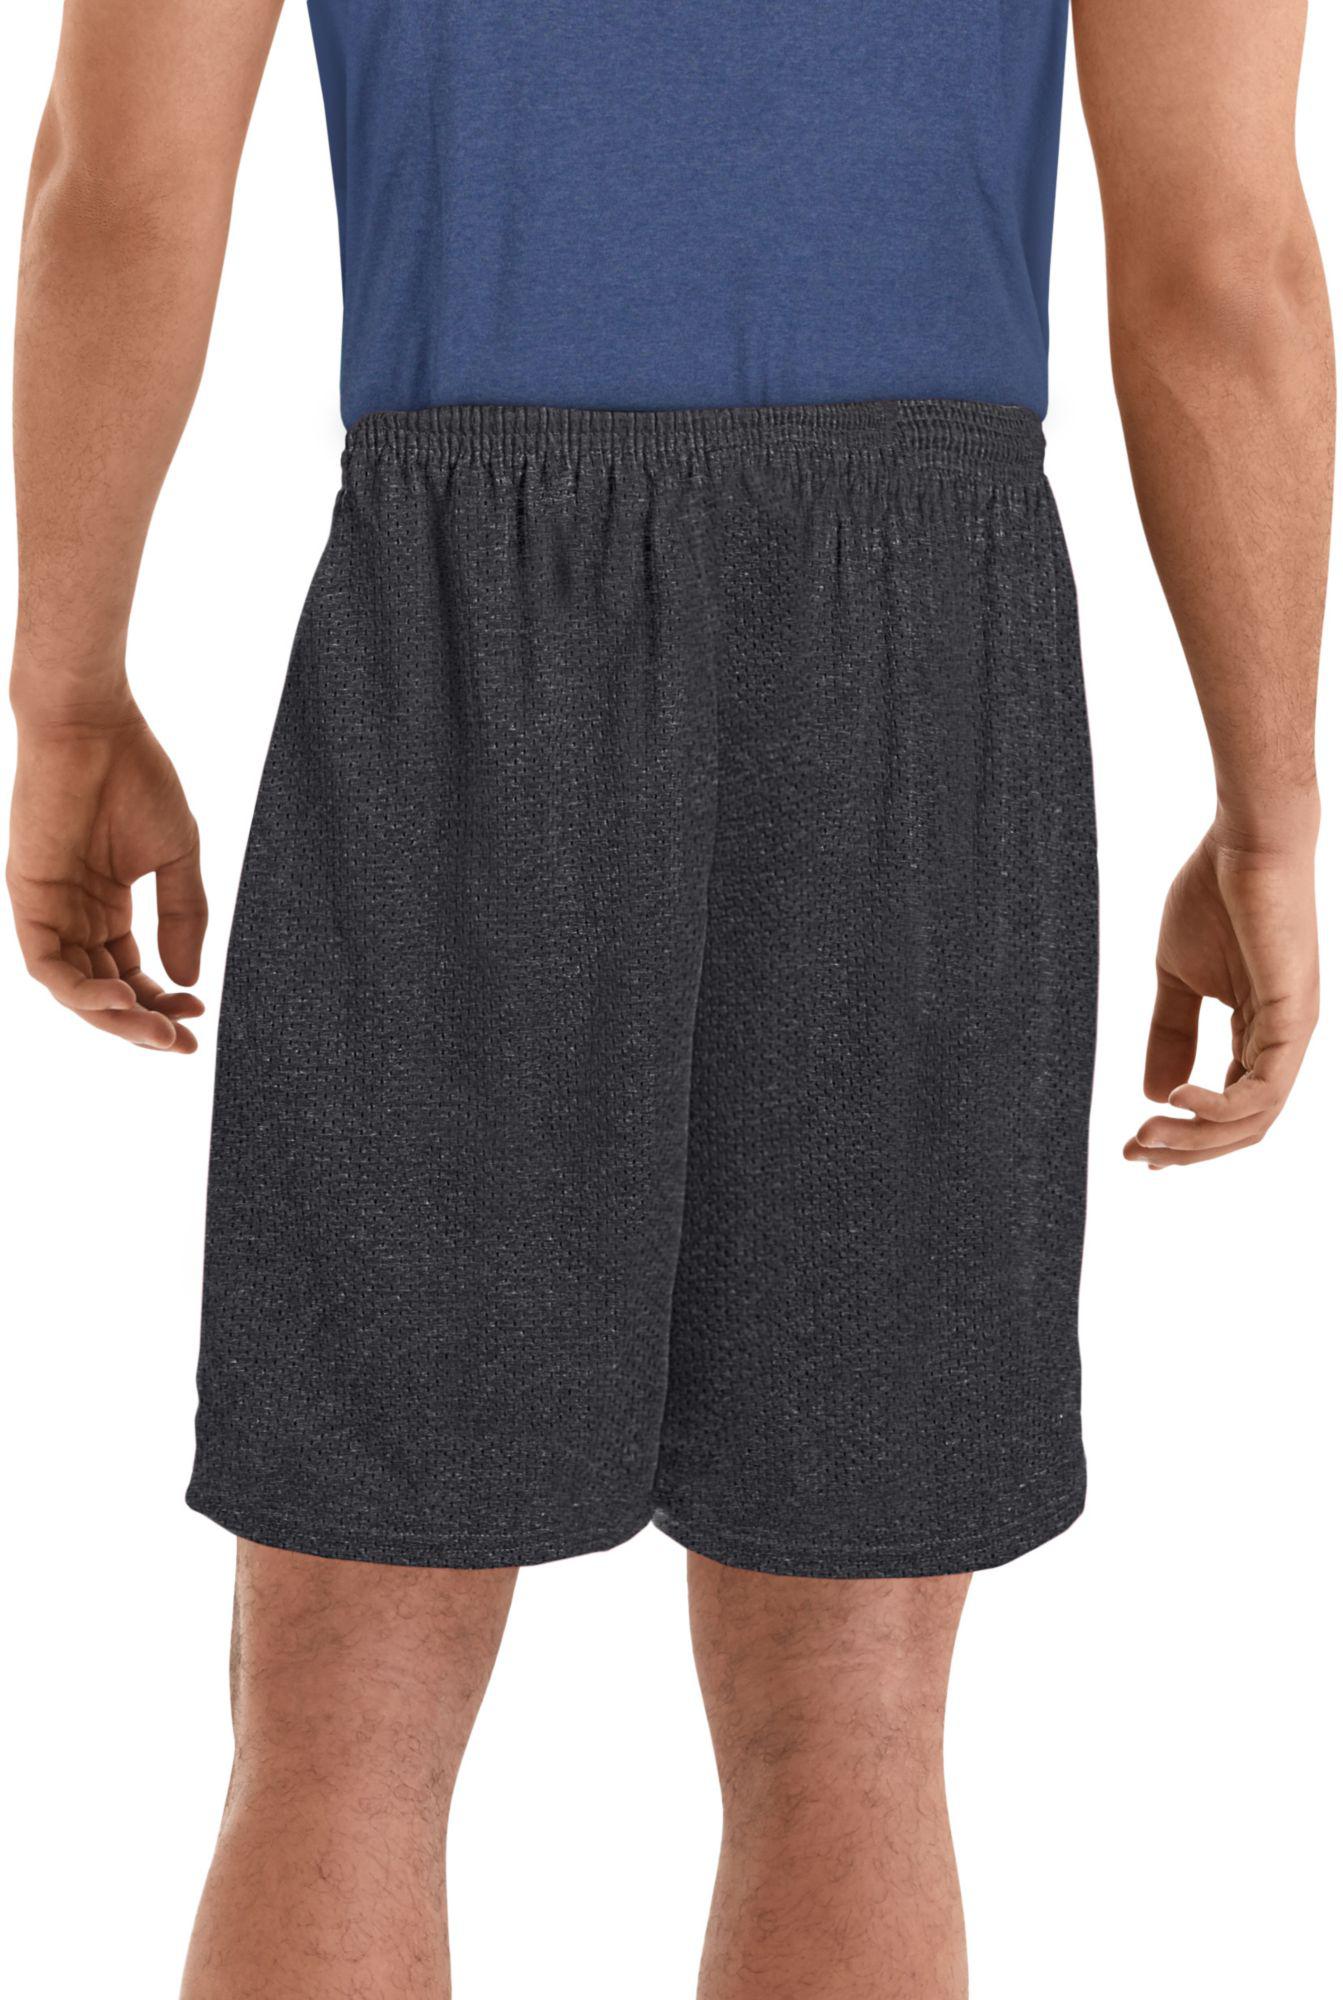 Champion Synthetic Mesh Shorts for Men - Lyst